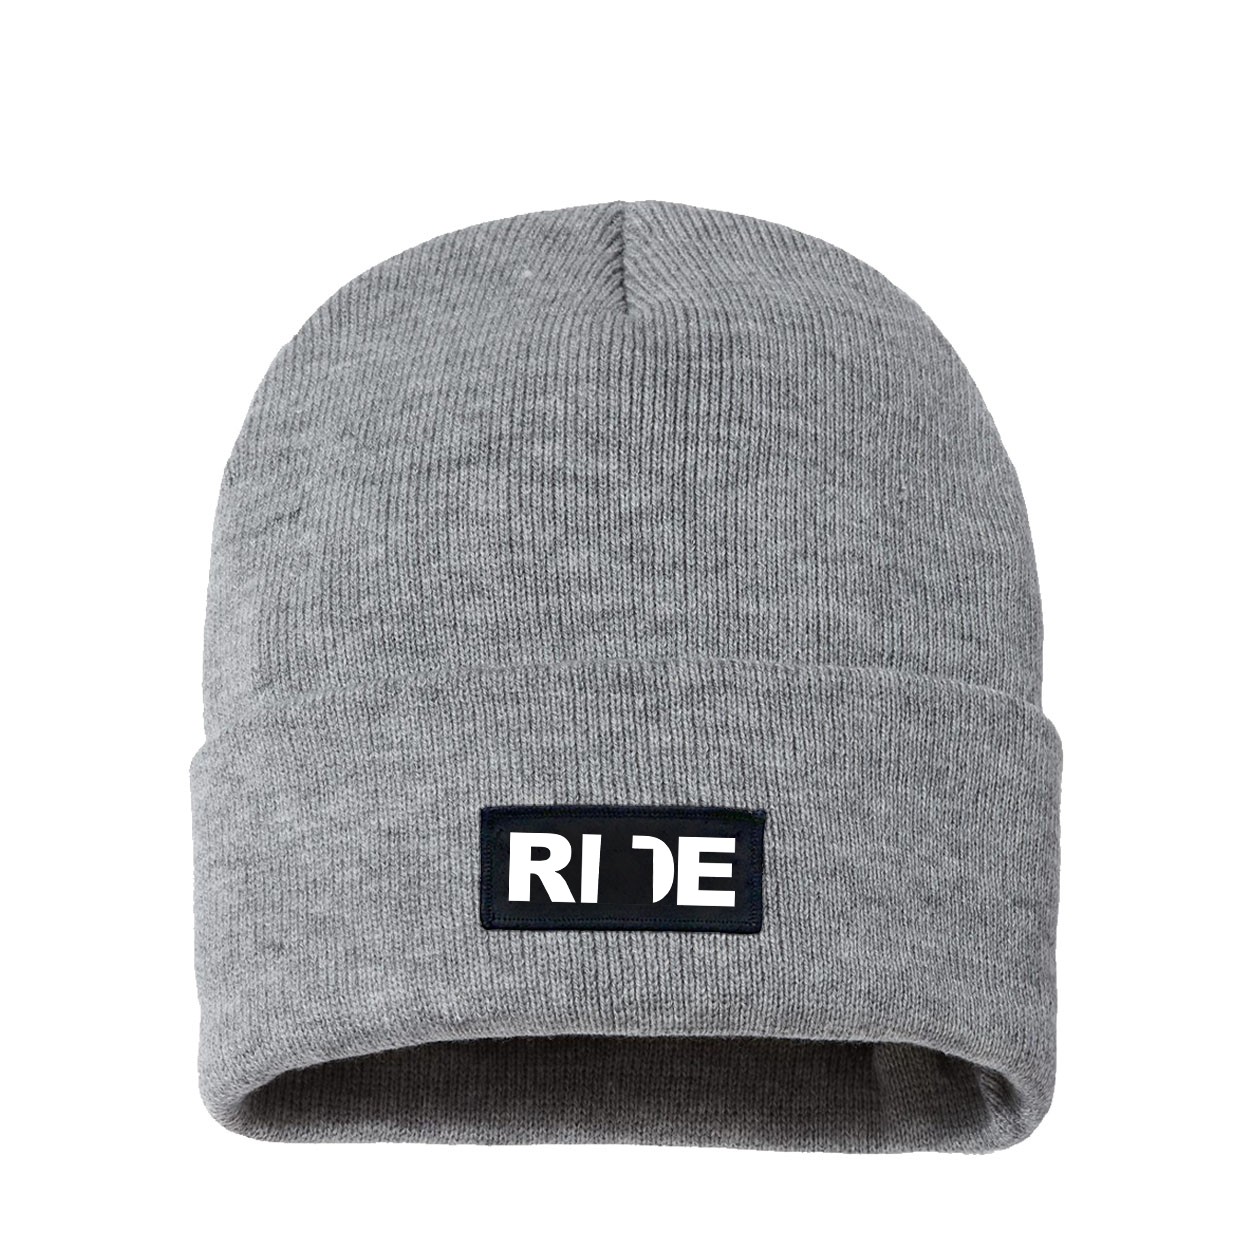 Ride Utah Night Out Woven Patch Night Out Sherpa Lined Cuffed Beanie Heather Gray (White Logo)